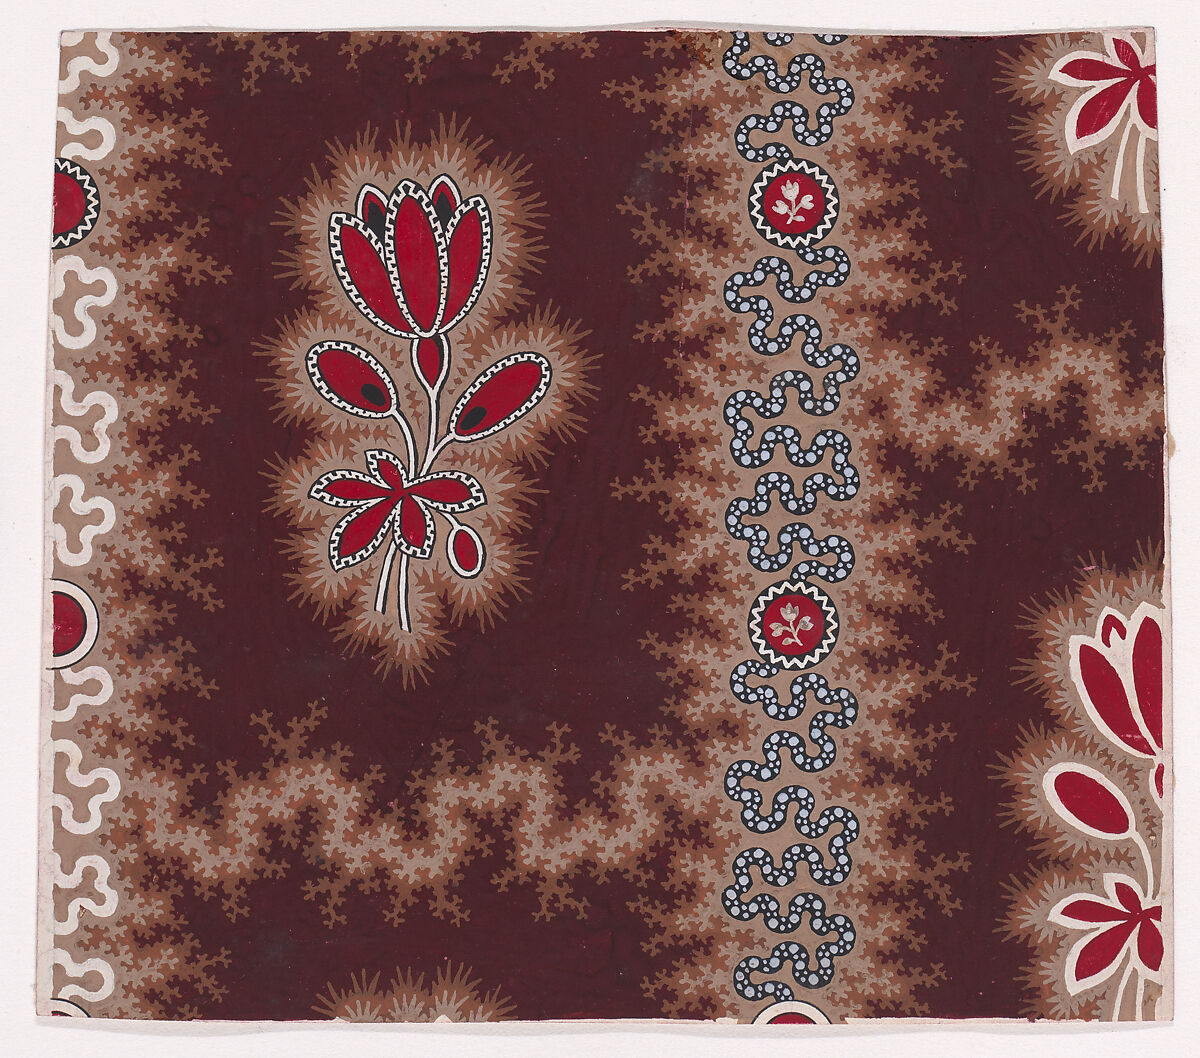 Textile Design with Vertical Rows of Bunches of Stylized Flowers and Stems with Leaves Framed by a Shade of Thorns Separated by Vertical Garlands of Branches with an Undulating Ribbon with Pearls and Small Stylized Flowers Inside a Circular Frame, Anonymous, Alsatian, 19th century, Gouache 